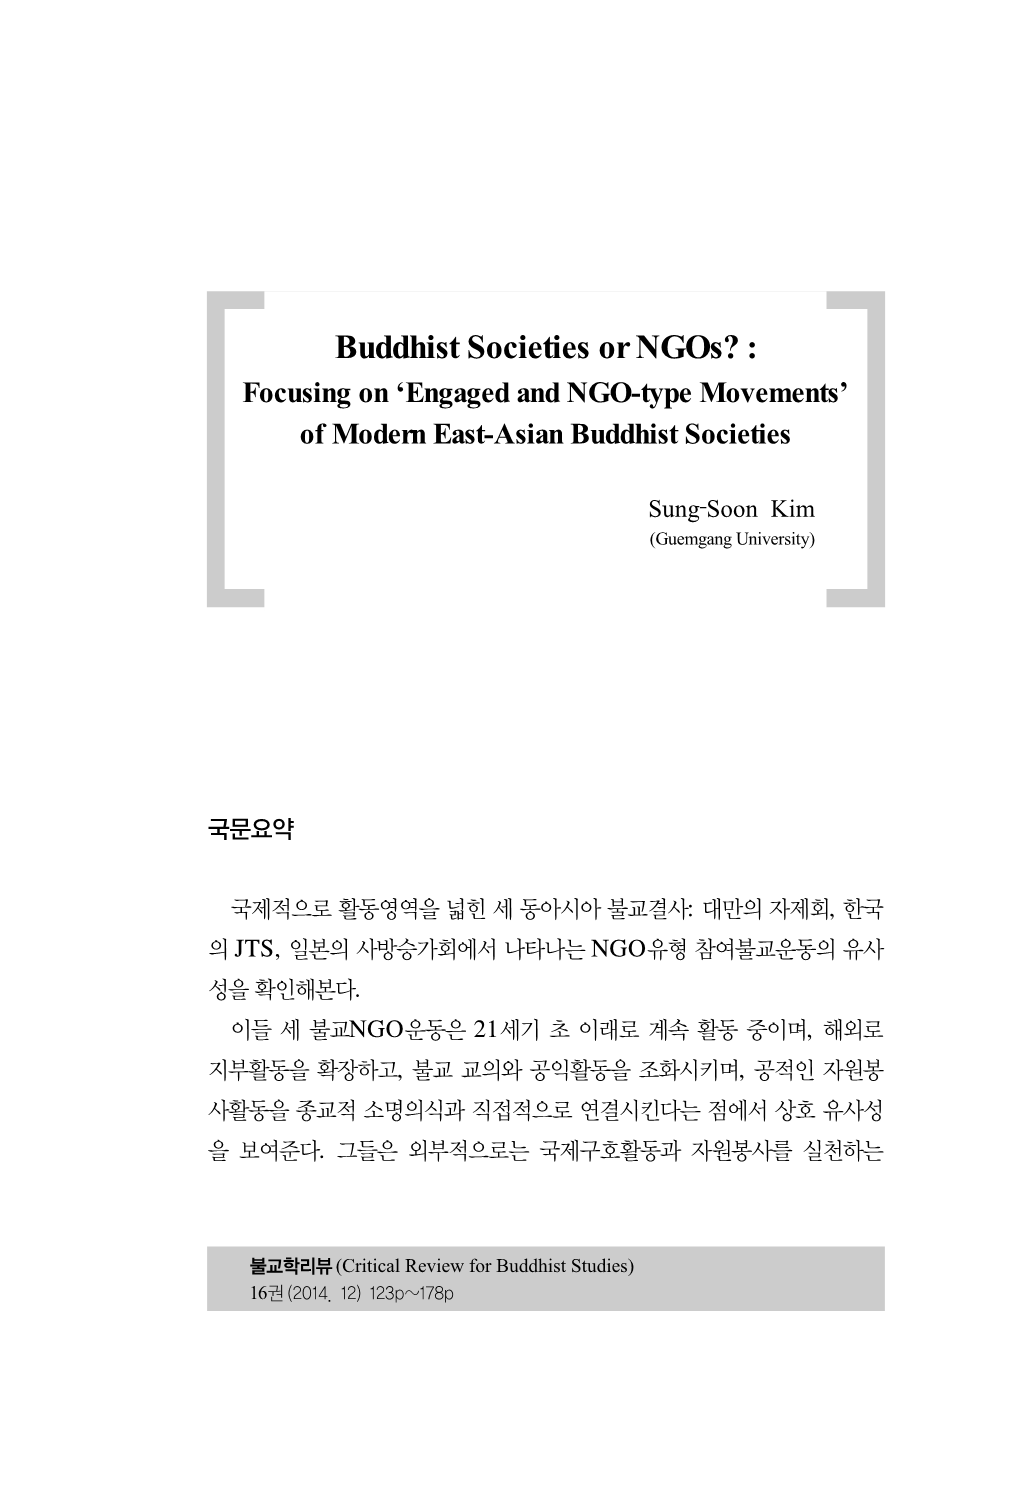 Buddhist Societies Or Ngos? : Focusing on ‘Engaged and NGO-Type Movements’ of Modern East-Asian Buddhist Societies